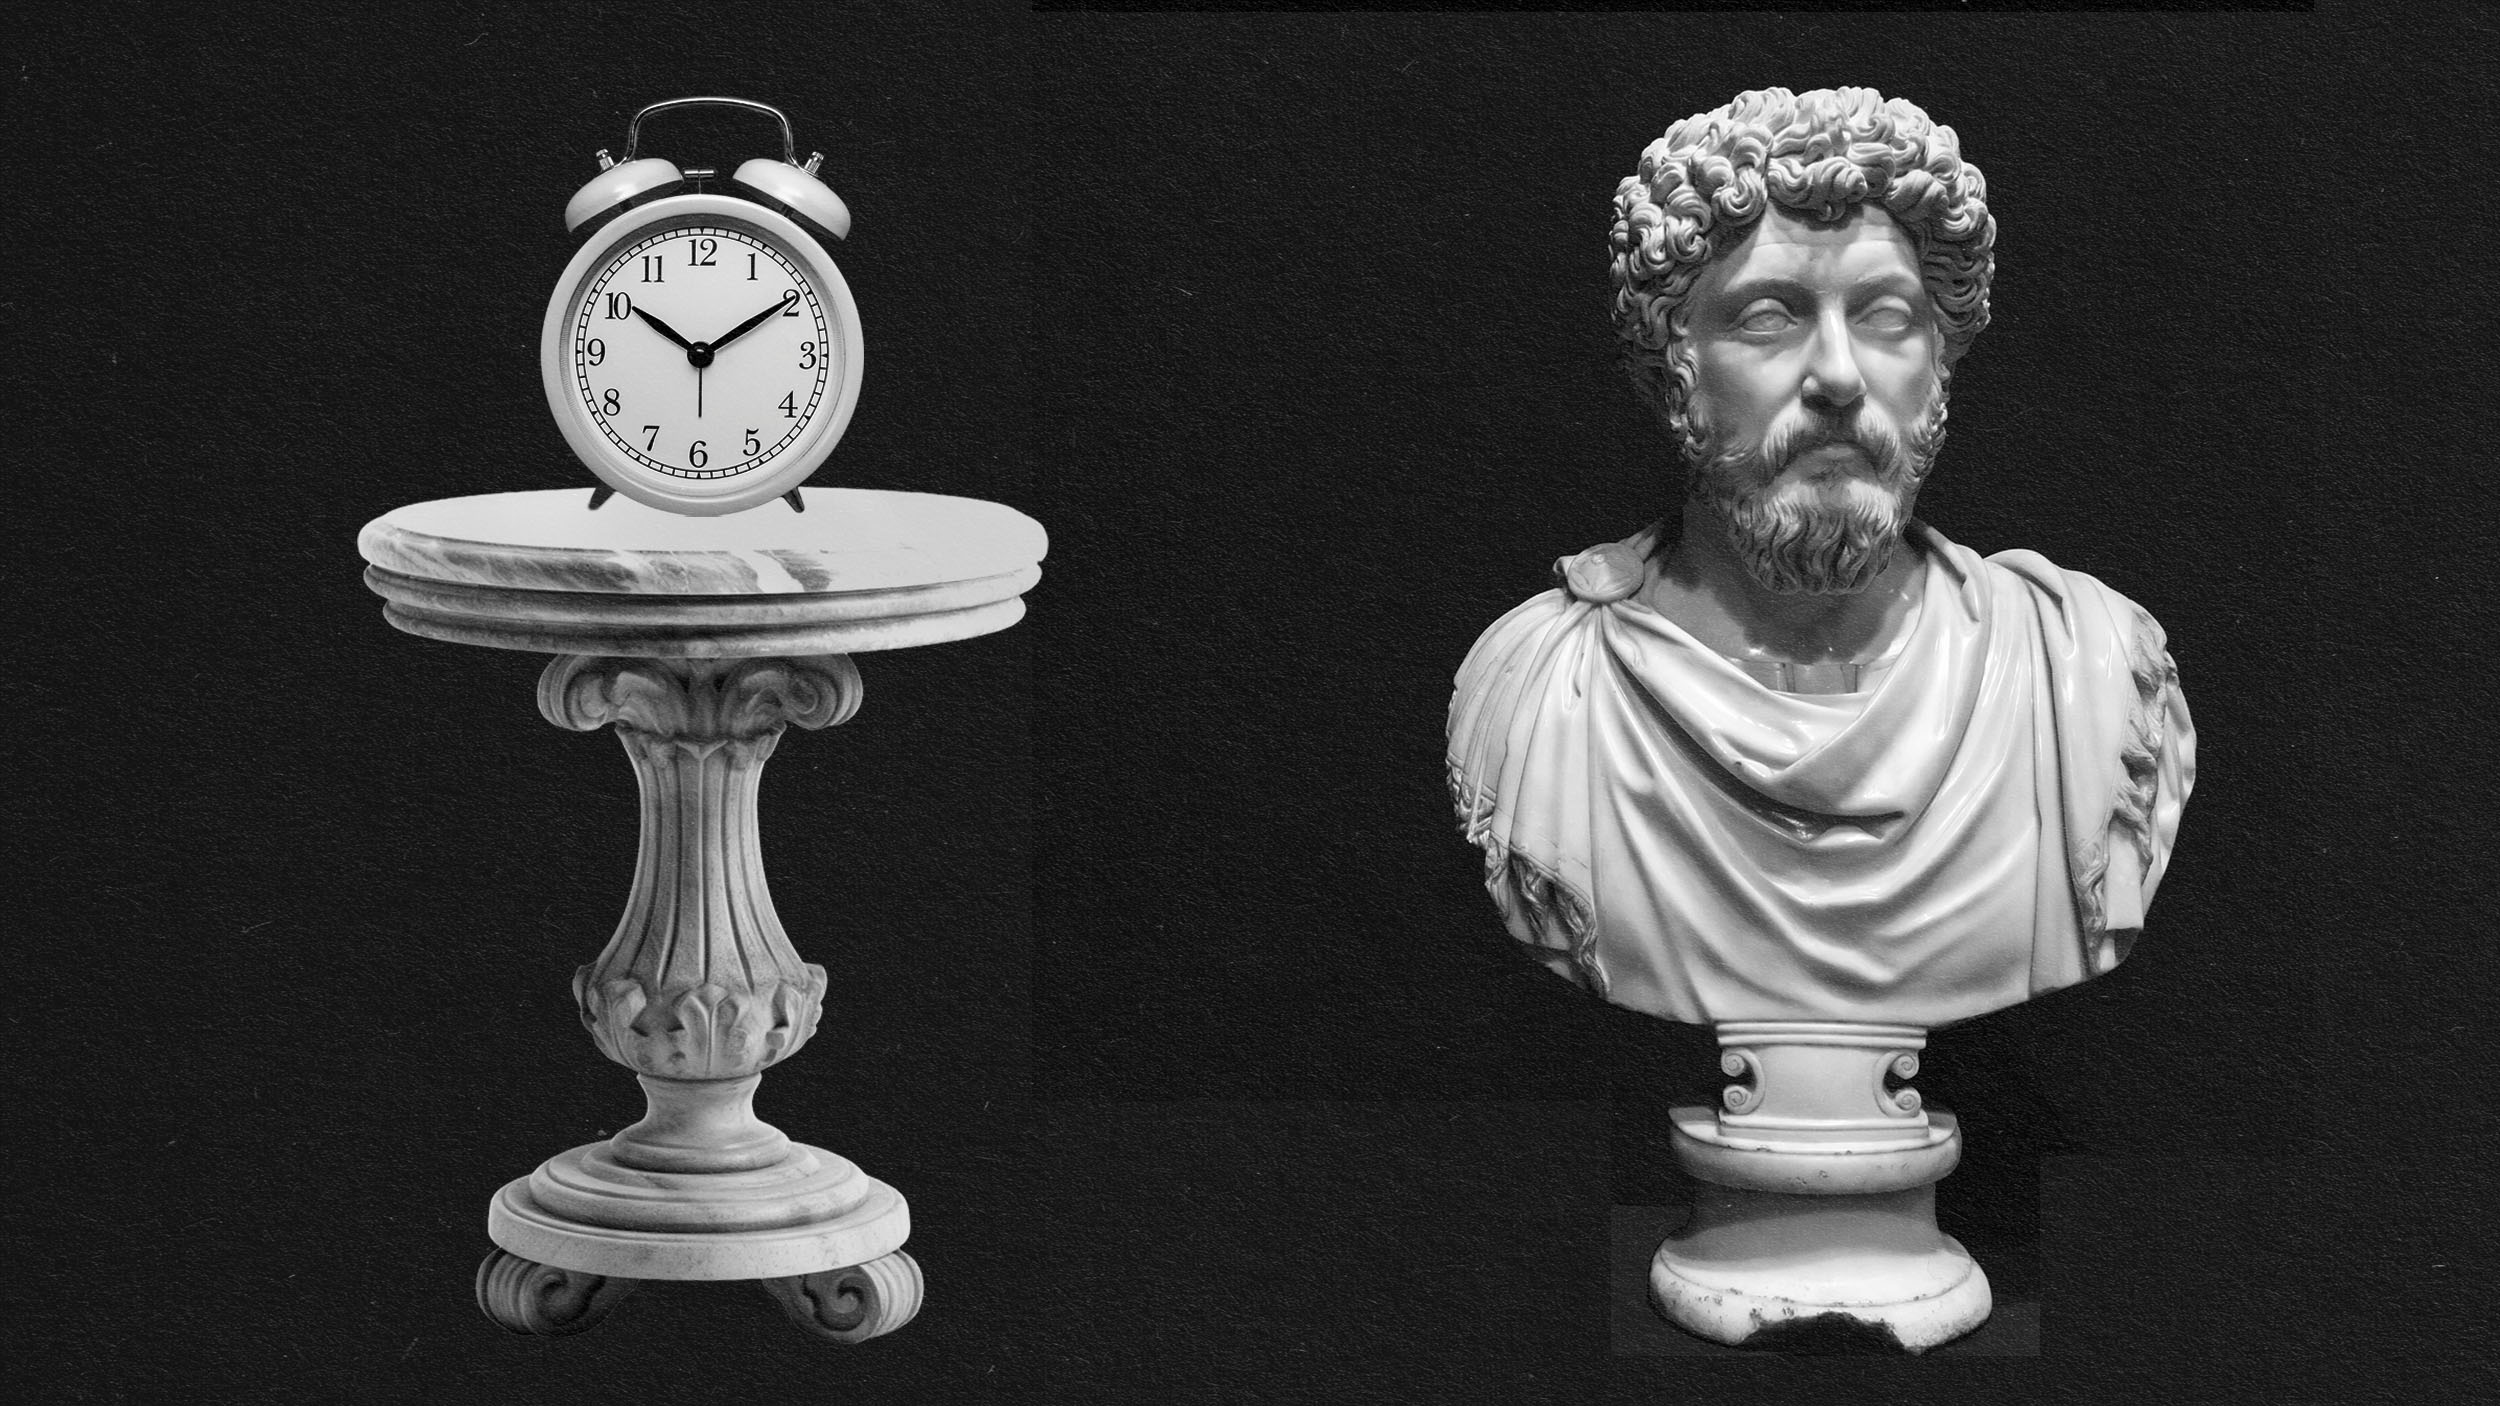 A bust of Marcus Aurelius placed next to a clock.